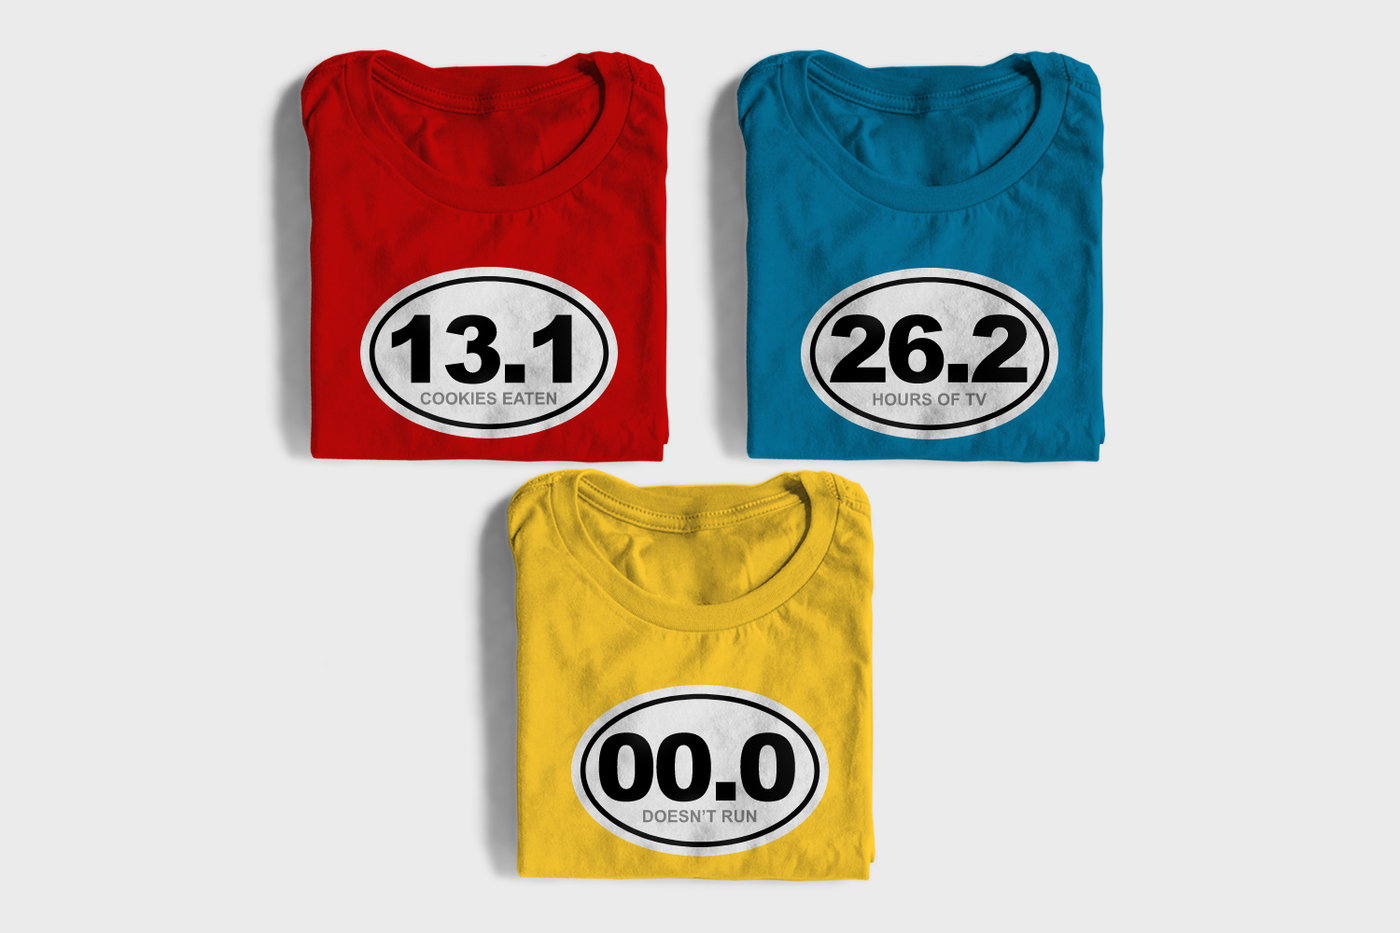 Three folded tees, each with a white oval design. One says "13.1 cookies eaten," one says "26.2 hours of TV," and one says "00.0 doesn't run."